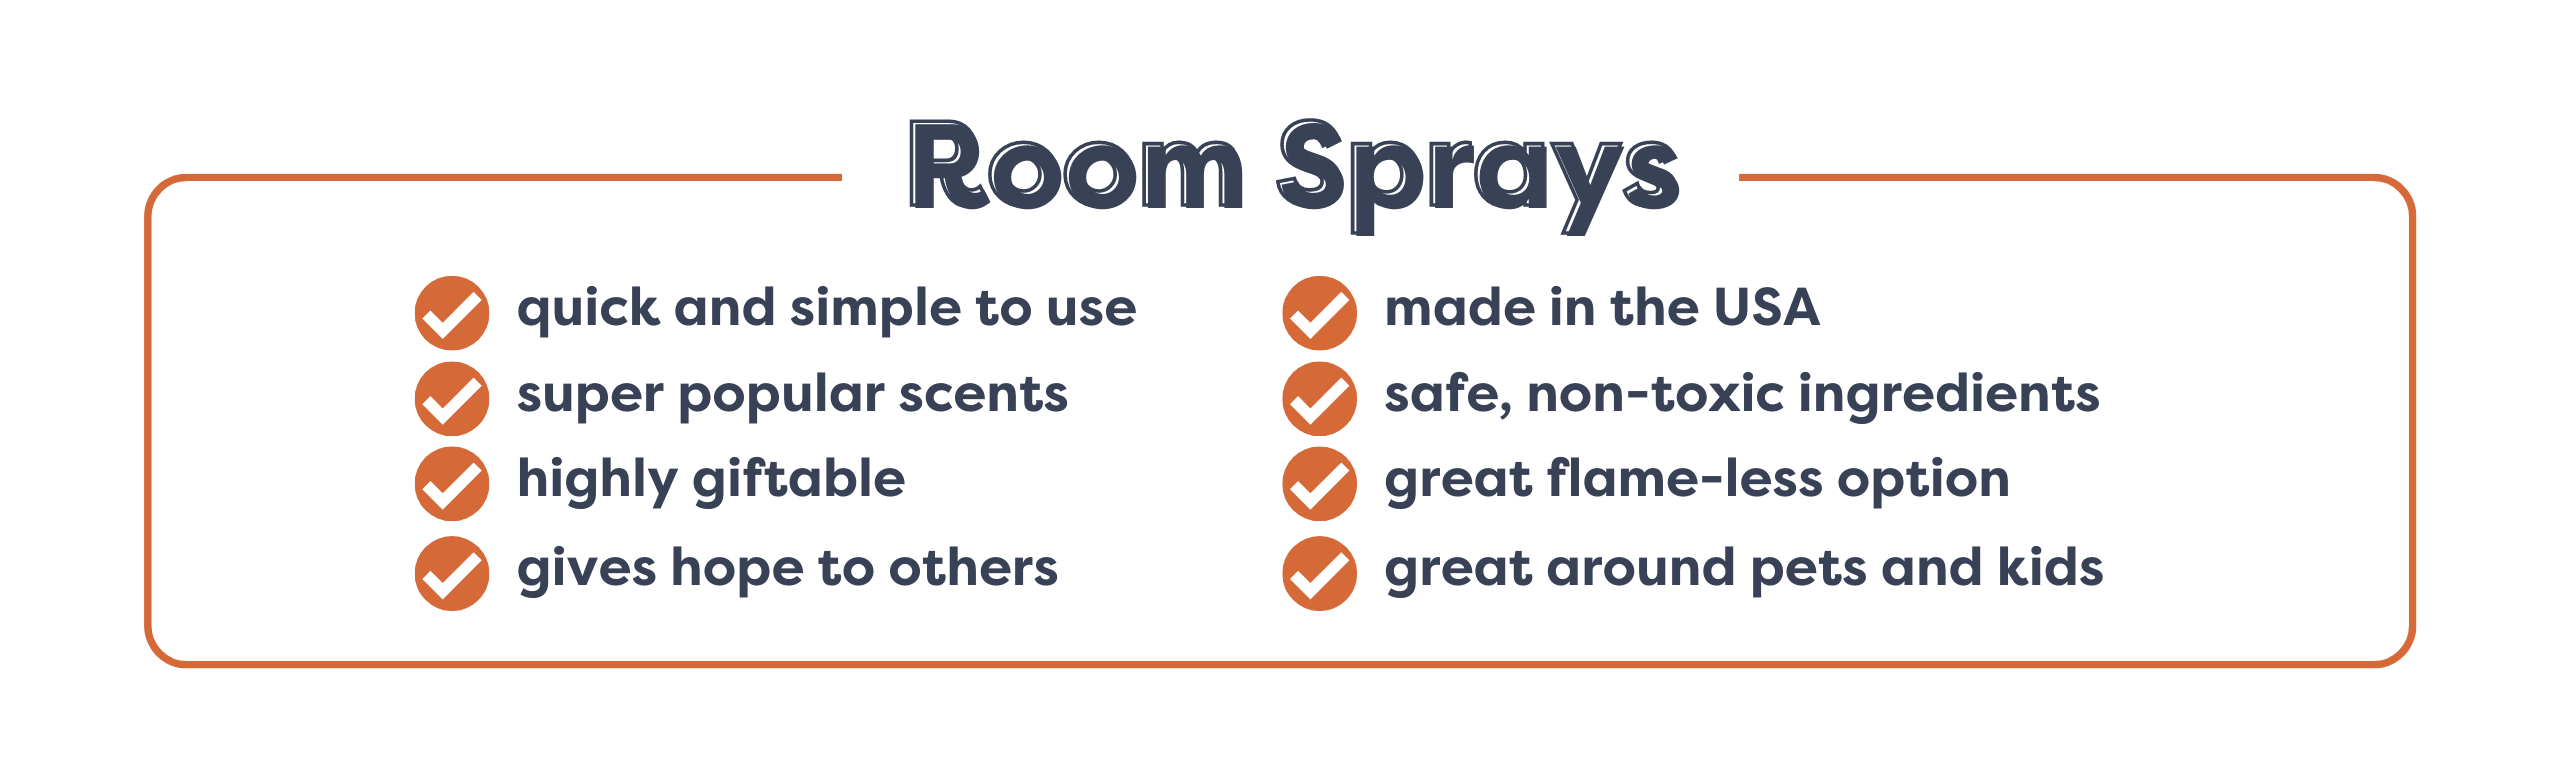 A list of awesome reasons to buy Room Sprays from Calyan Wax Co.  